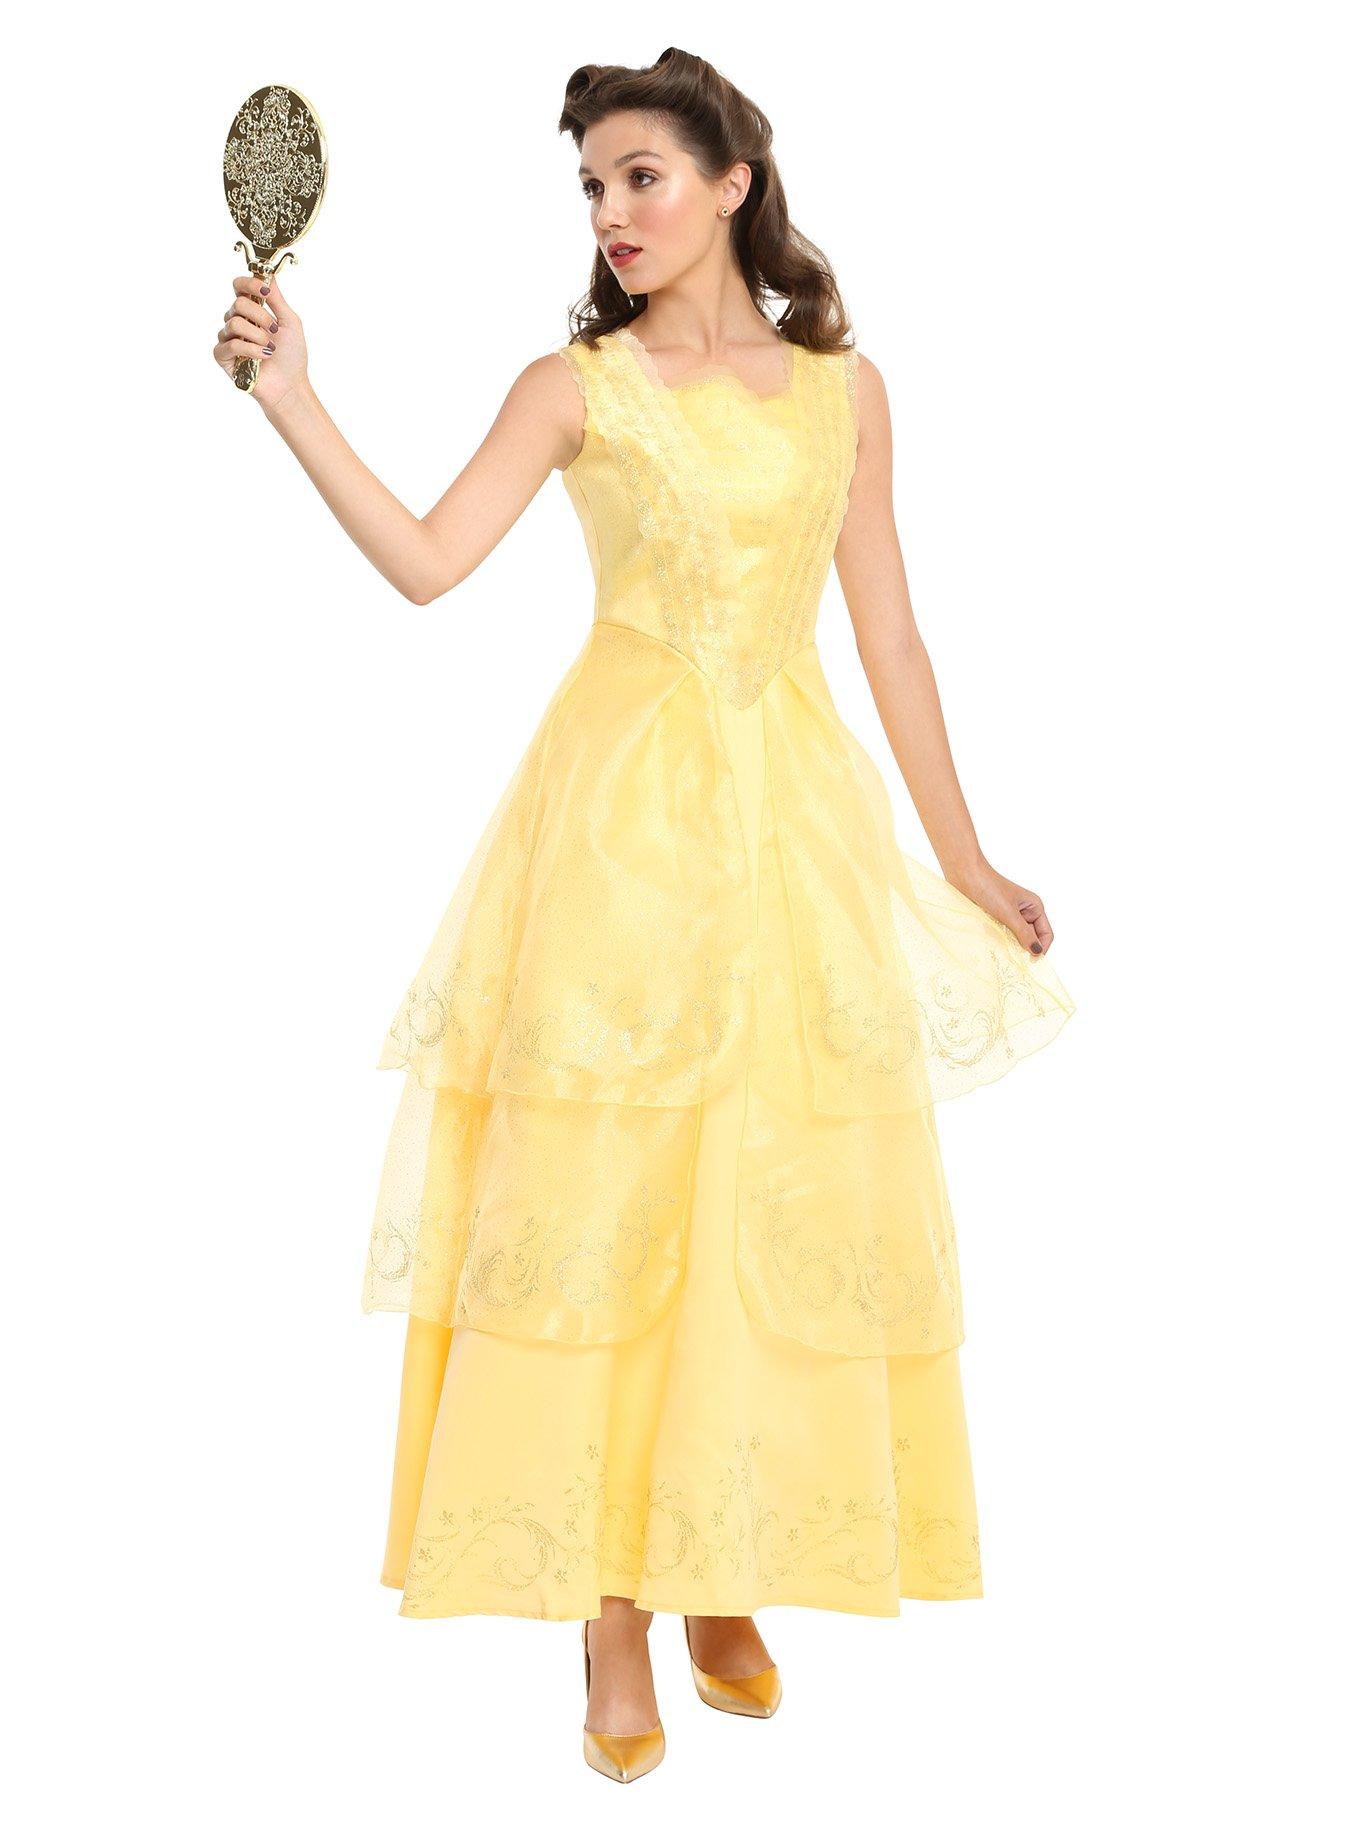 Disney Beauty And The Beast Belle Ball Gown Prestige Costume | Hot Topic